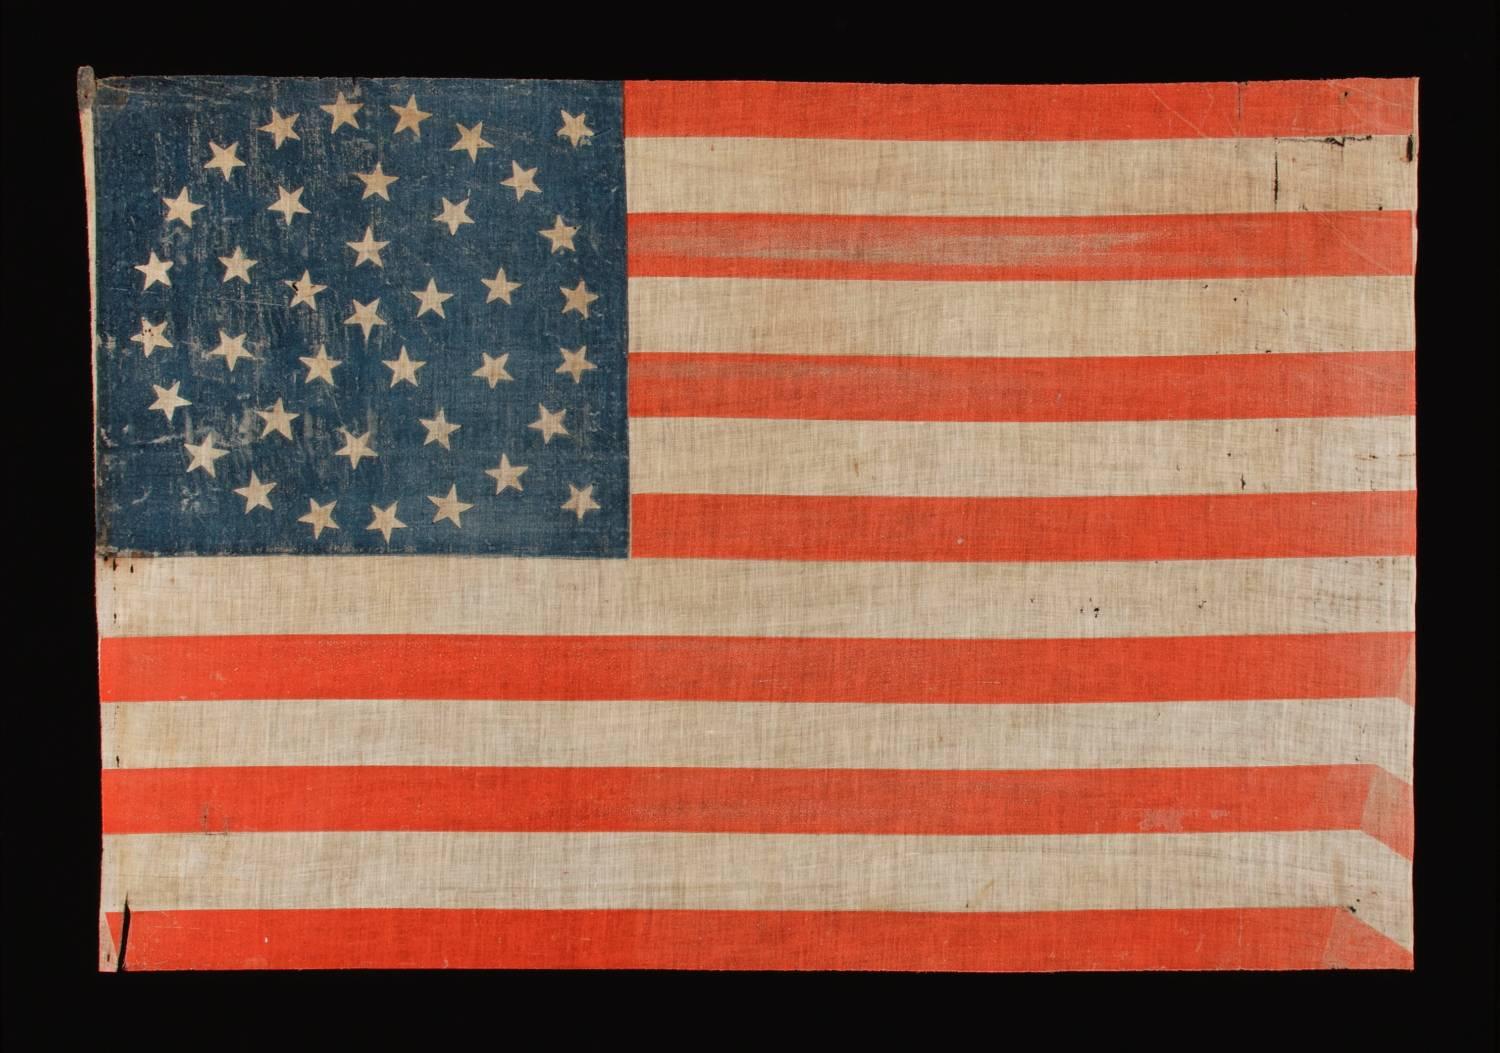 38 stars in a medallion configuration with two outliers, Colorado Statehood, 1876-1889, a large example with bold coloration 

38 star American parade flag, block-printed by hand on coarse, glazed cotton. The stars are arranged in a triple-wreath